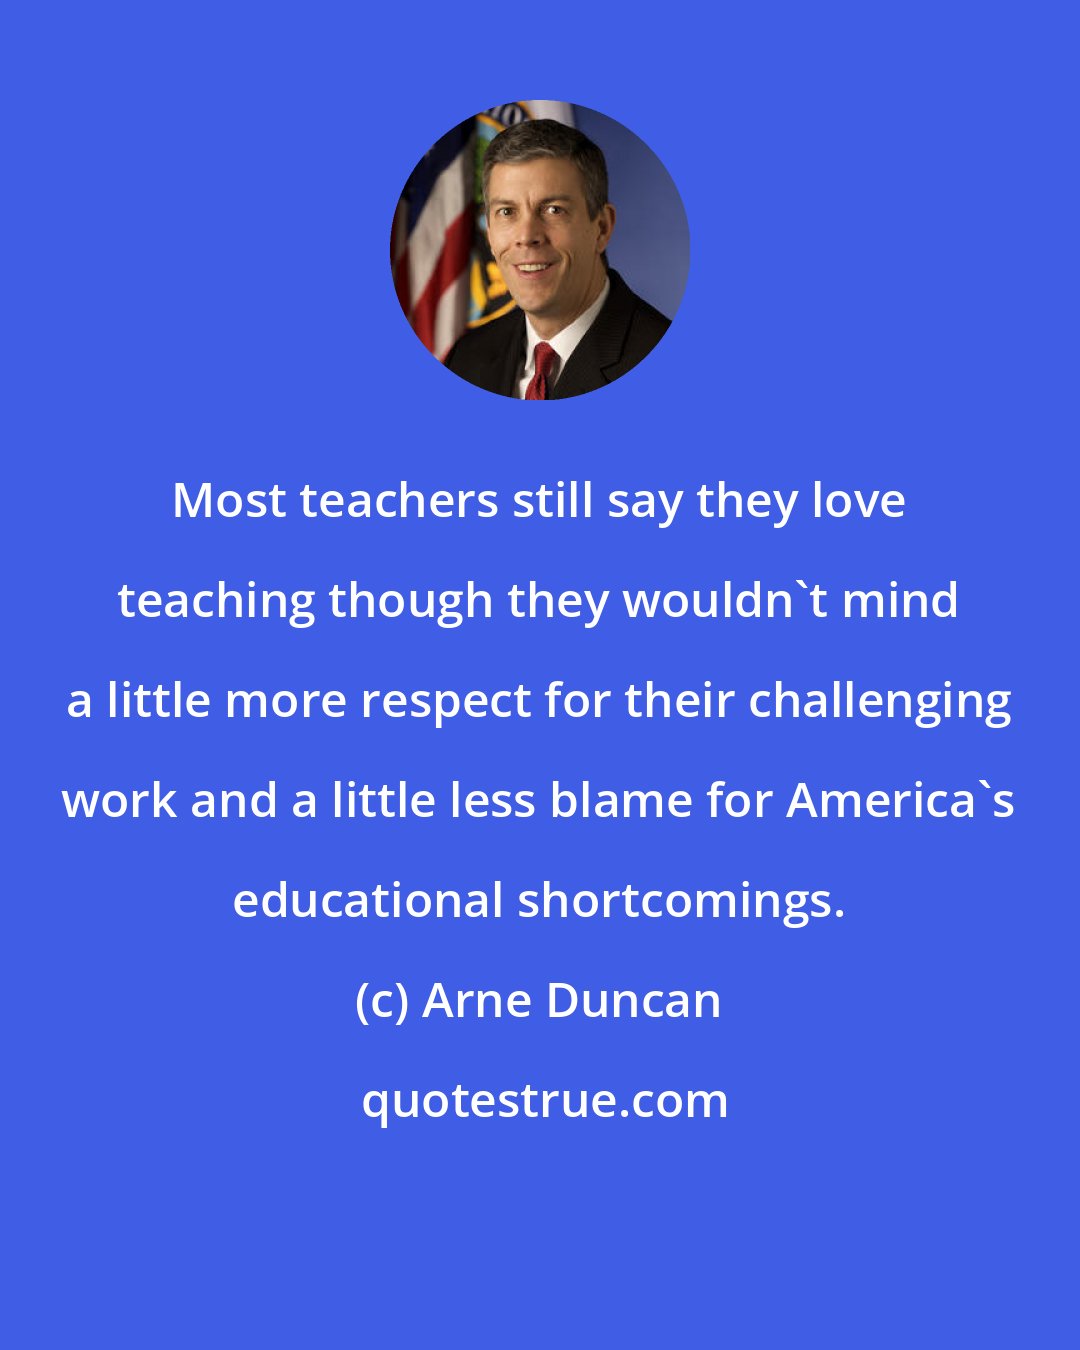 Arne Duncan: Most teachers still say they love teaching though they wouldn't mind a little more respect for their challenging work and a little less blame for America's educational shortcomings.